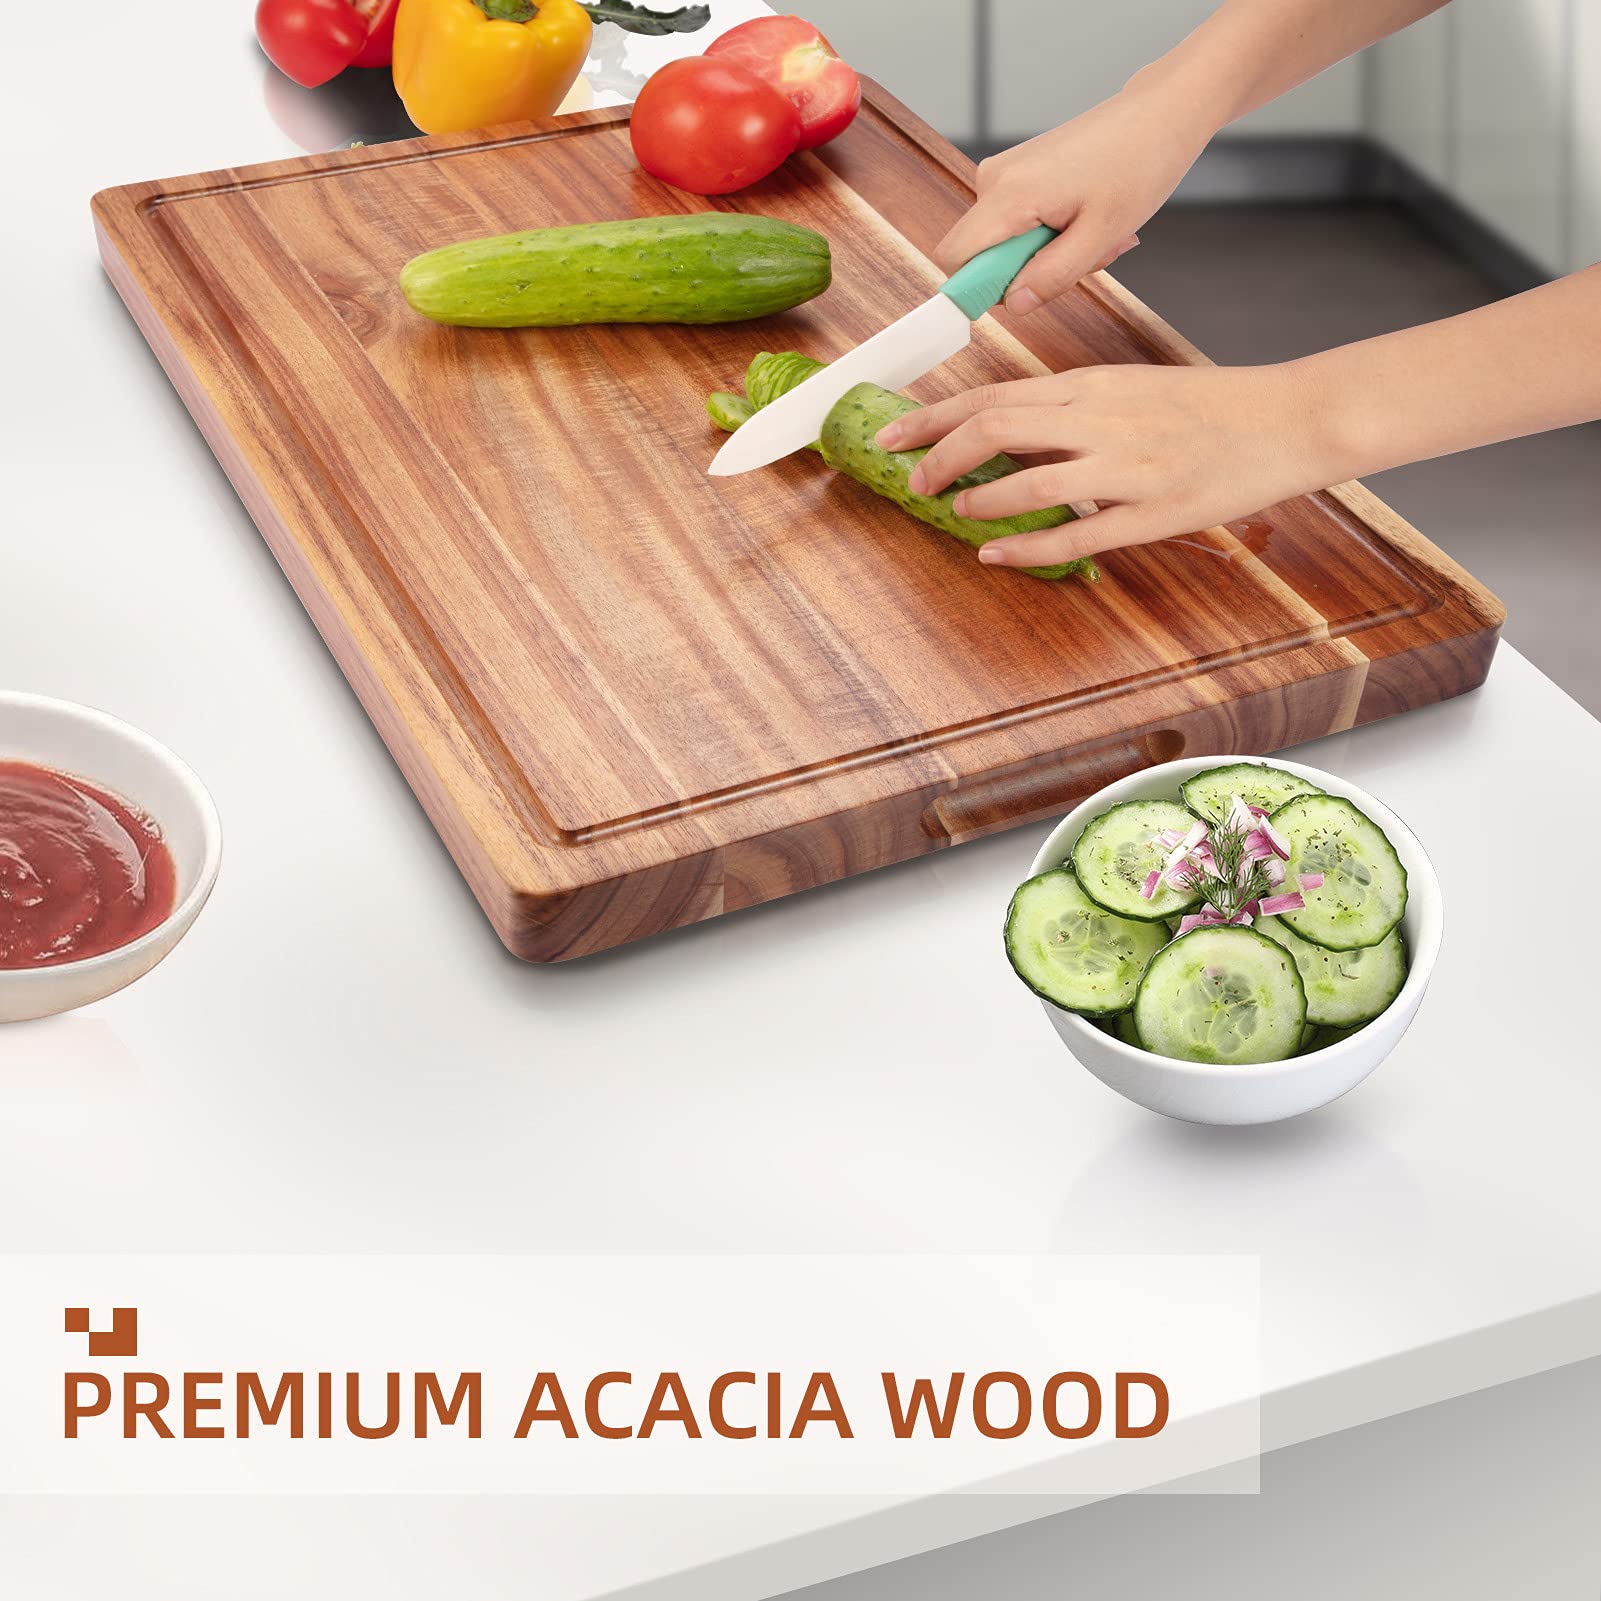 Large Acacia Wood Cutting Boards for Kitchen, 24 x 18 Inch Extra Large Wooden Cutting Board with Juice Groove, Reversible Butcher Block Cutting Board for Meat and Veggies